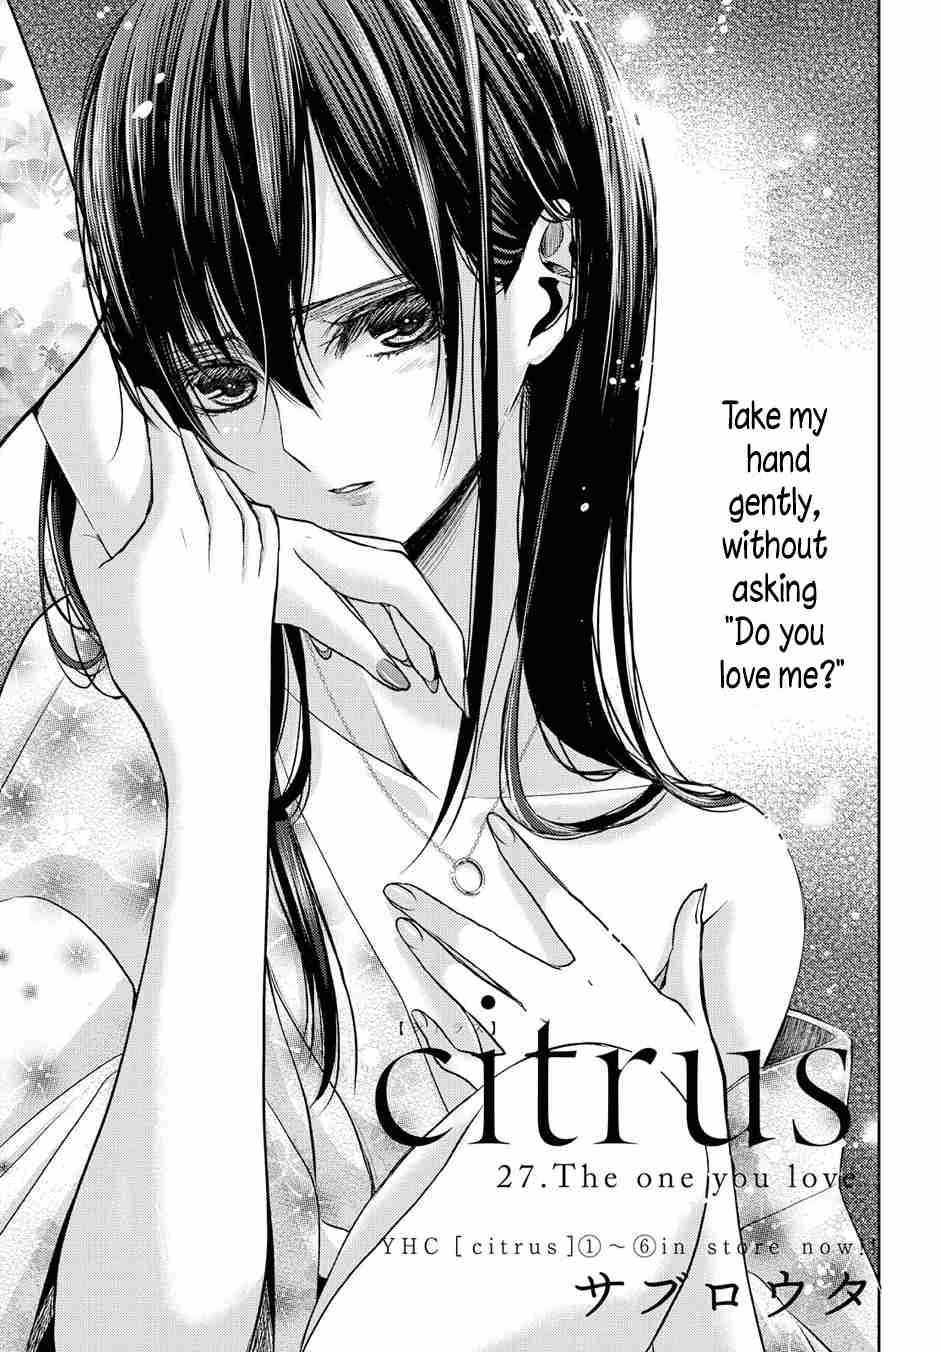 Citrus Vol. 7 Ch. 27 The one you love